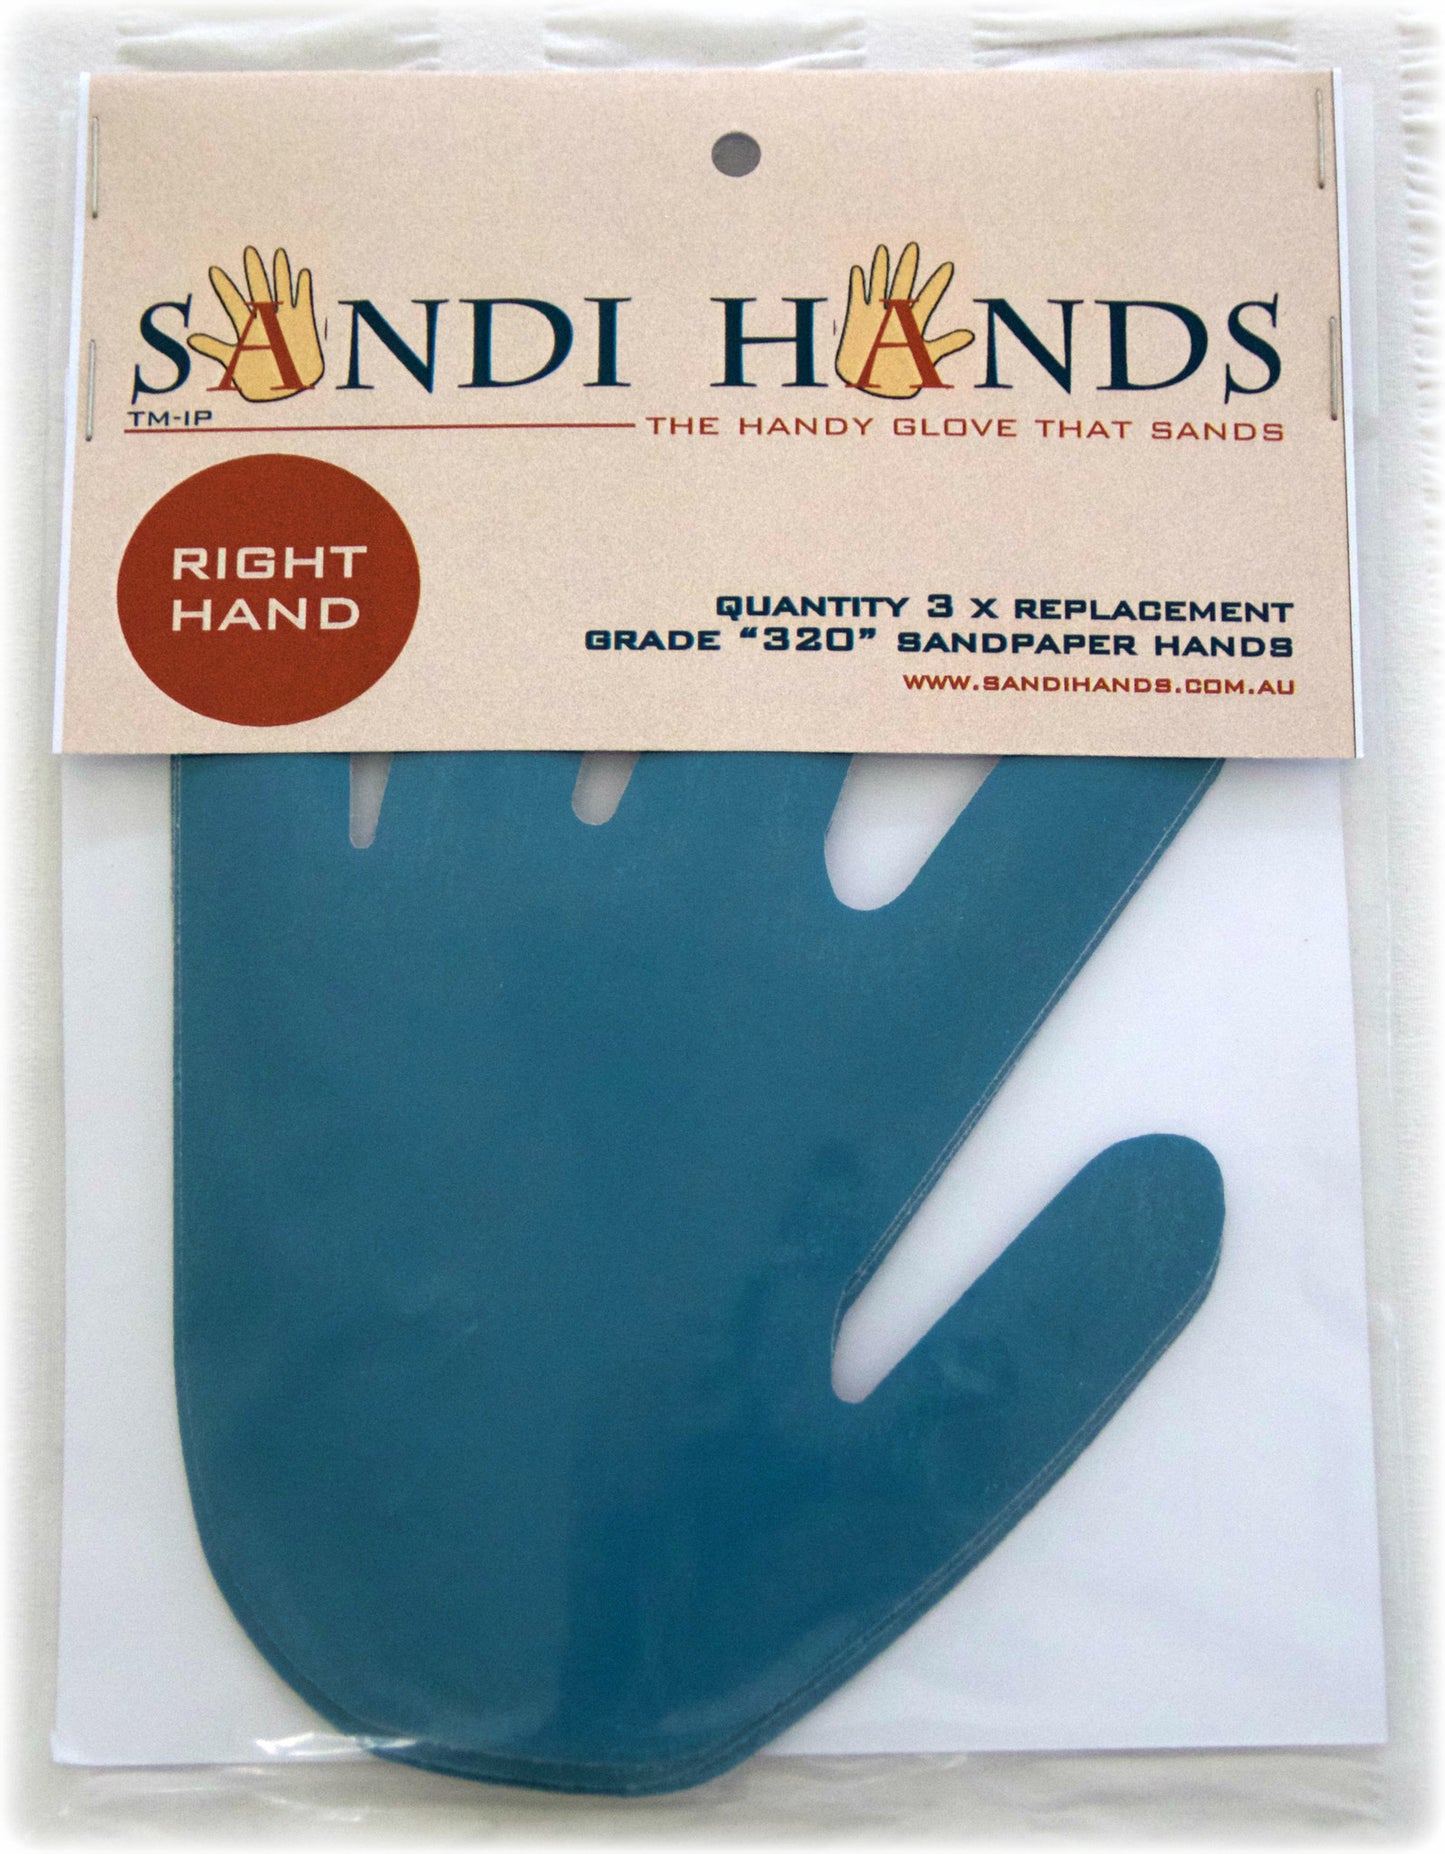 SANDI HANDS SANDPAPER REPLACEMENT GRITS right hand UK stockist Emily Rose Vintage